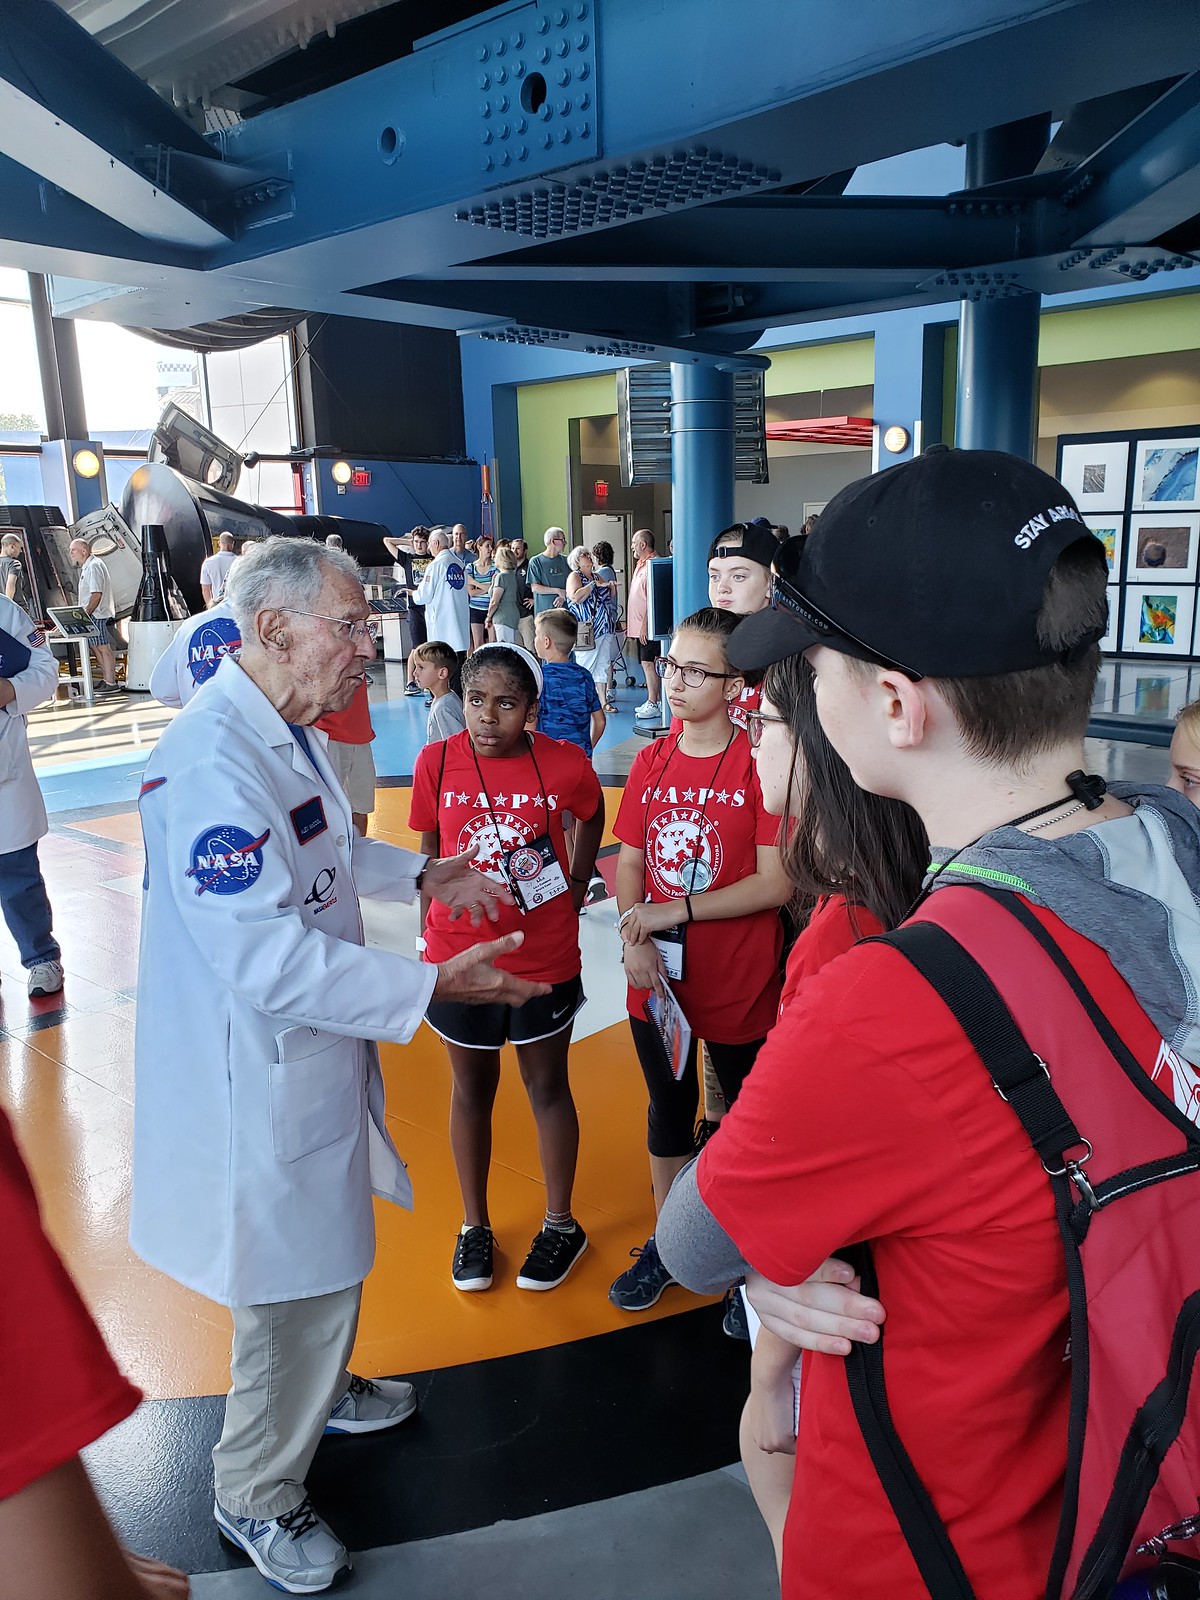 2019_YP_Space Camp 34